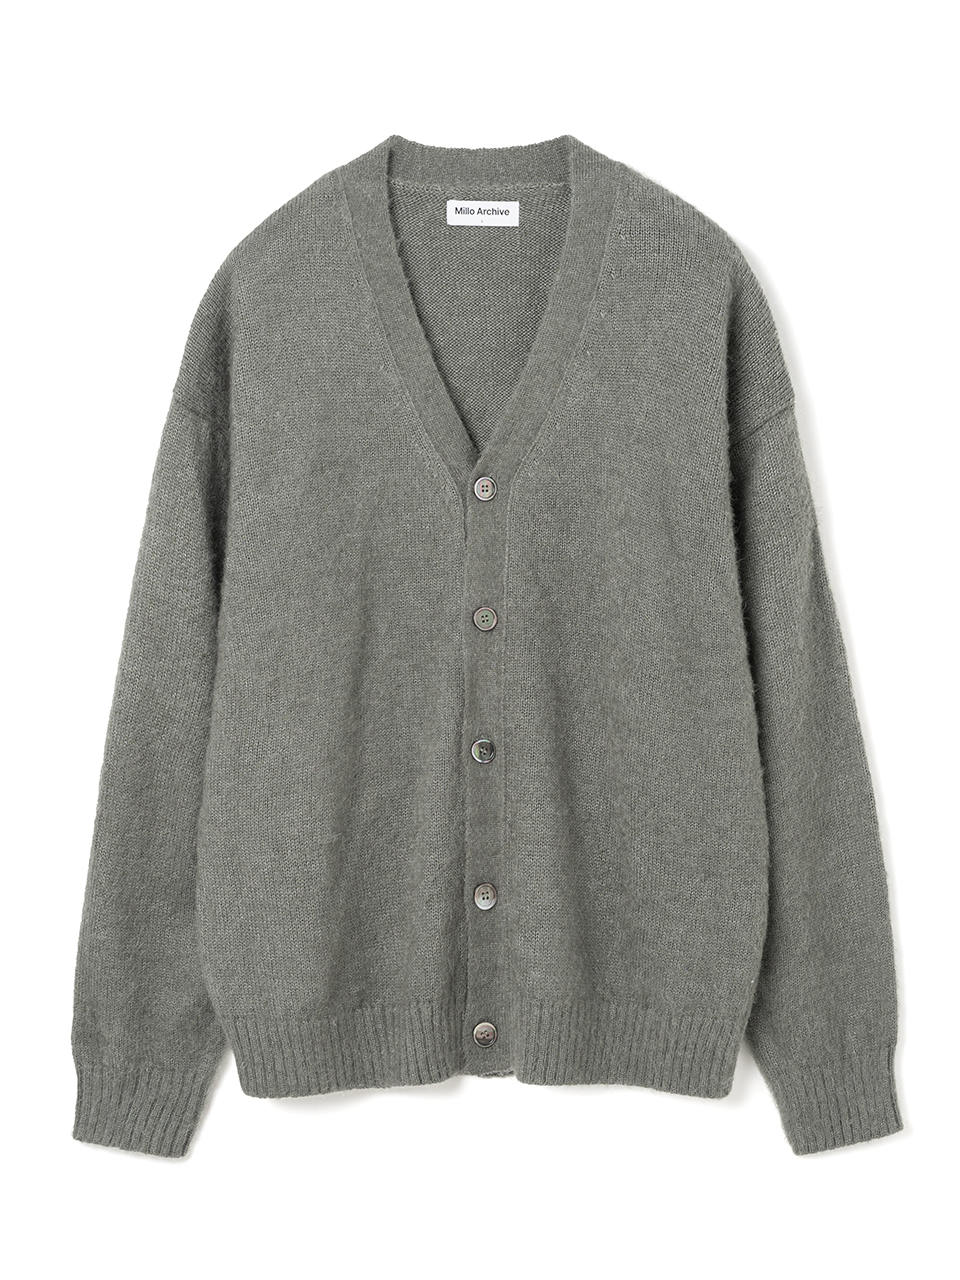 New Crown Mohair Cardigan [Gray]